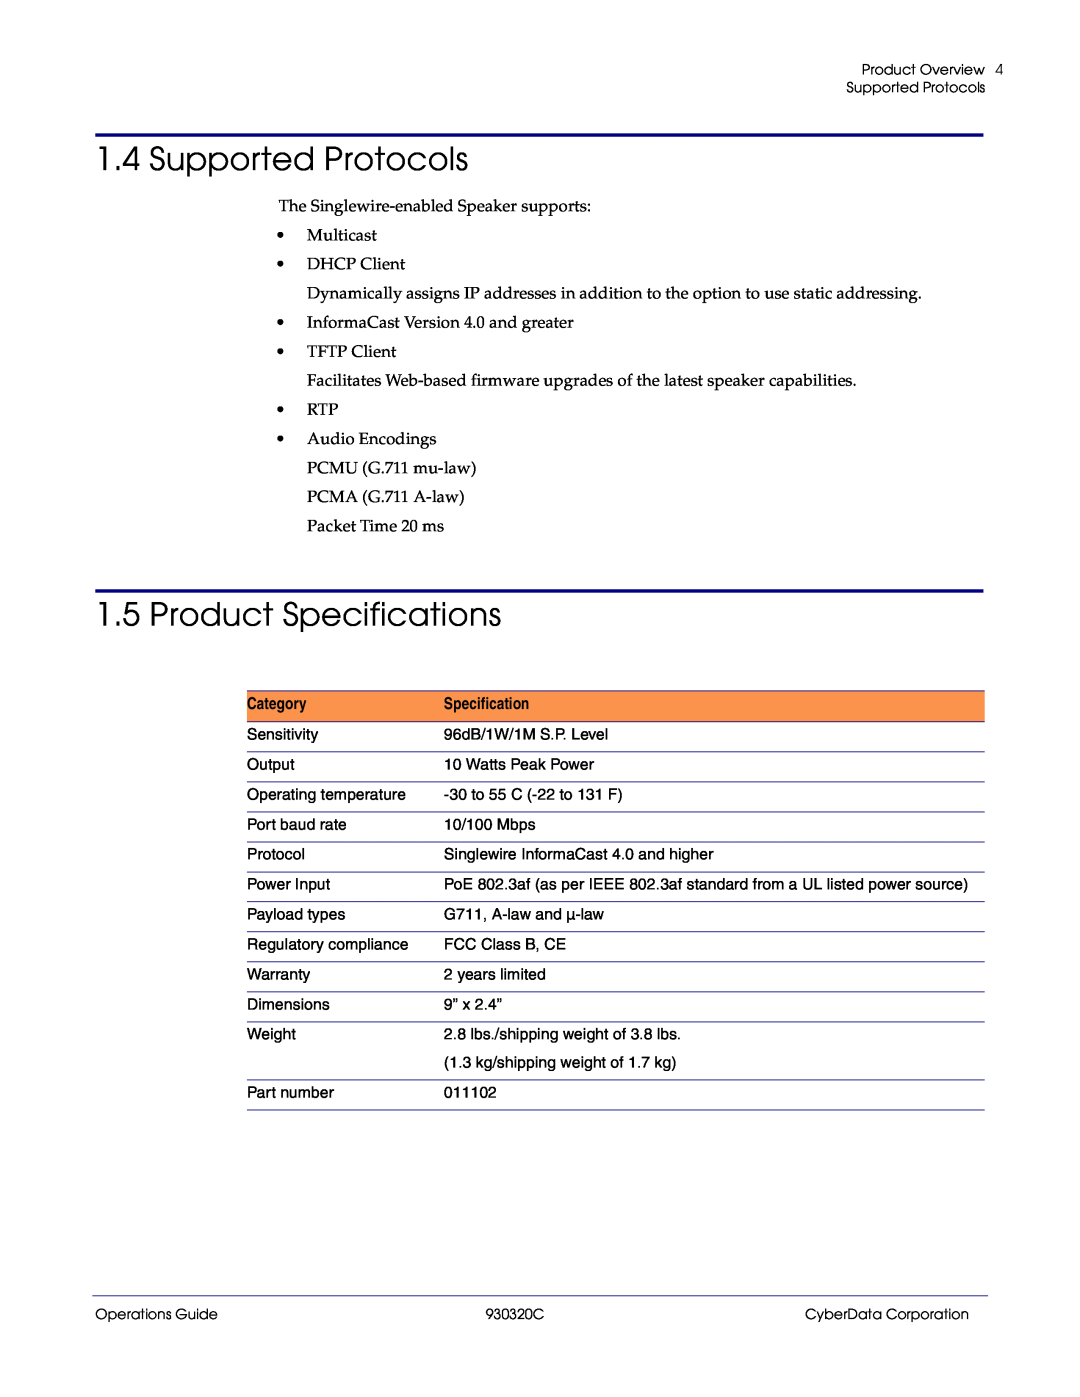 CyberData 11103 manual Supported Protocols, 1.5Product Specifications, Category 